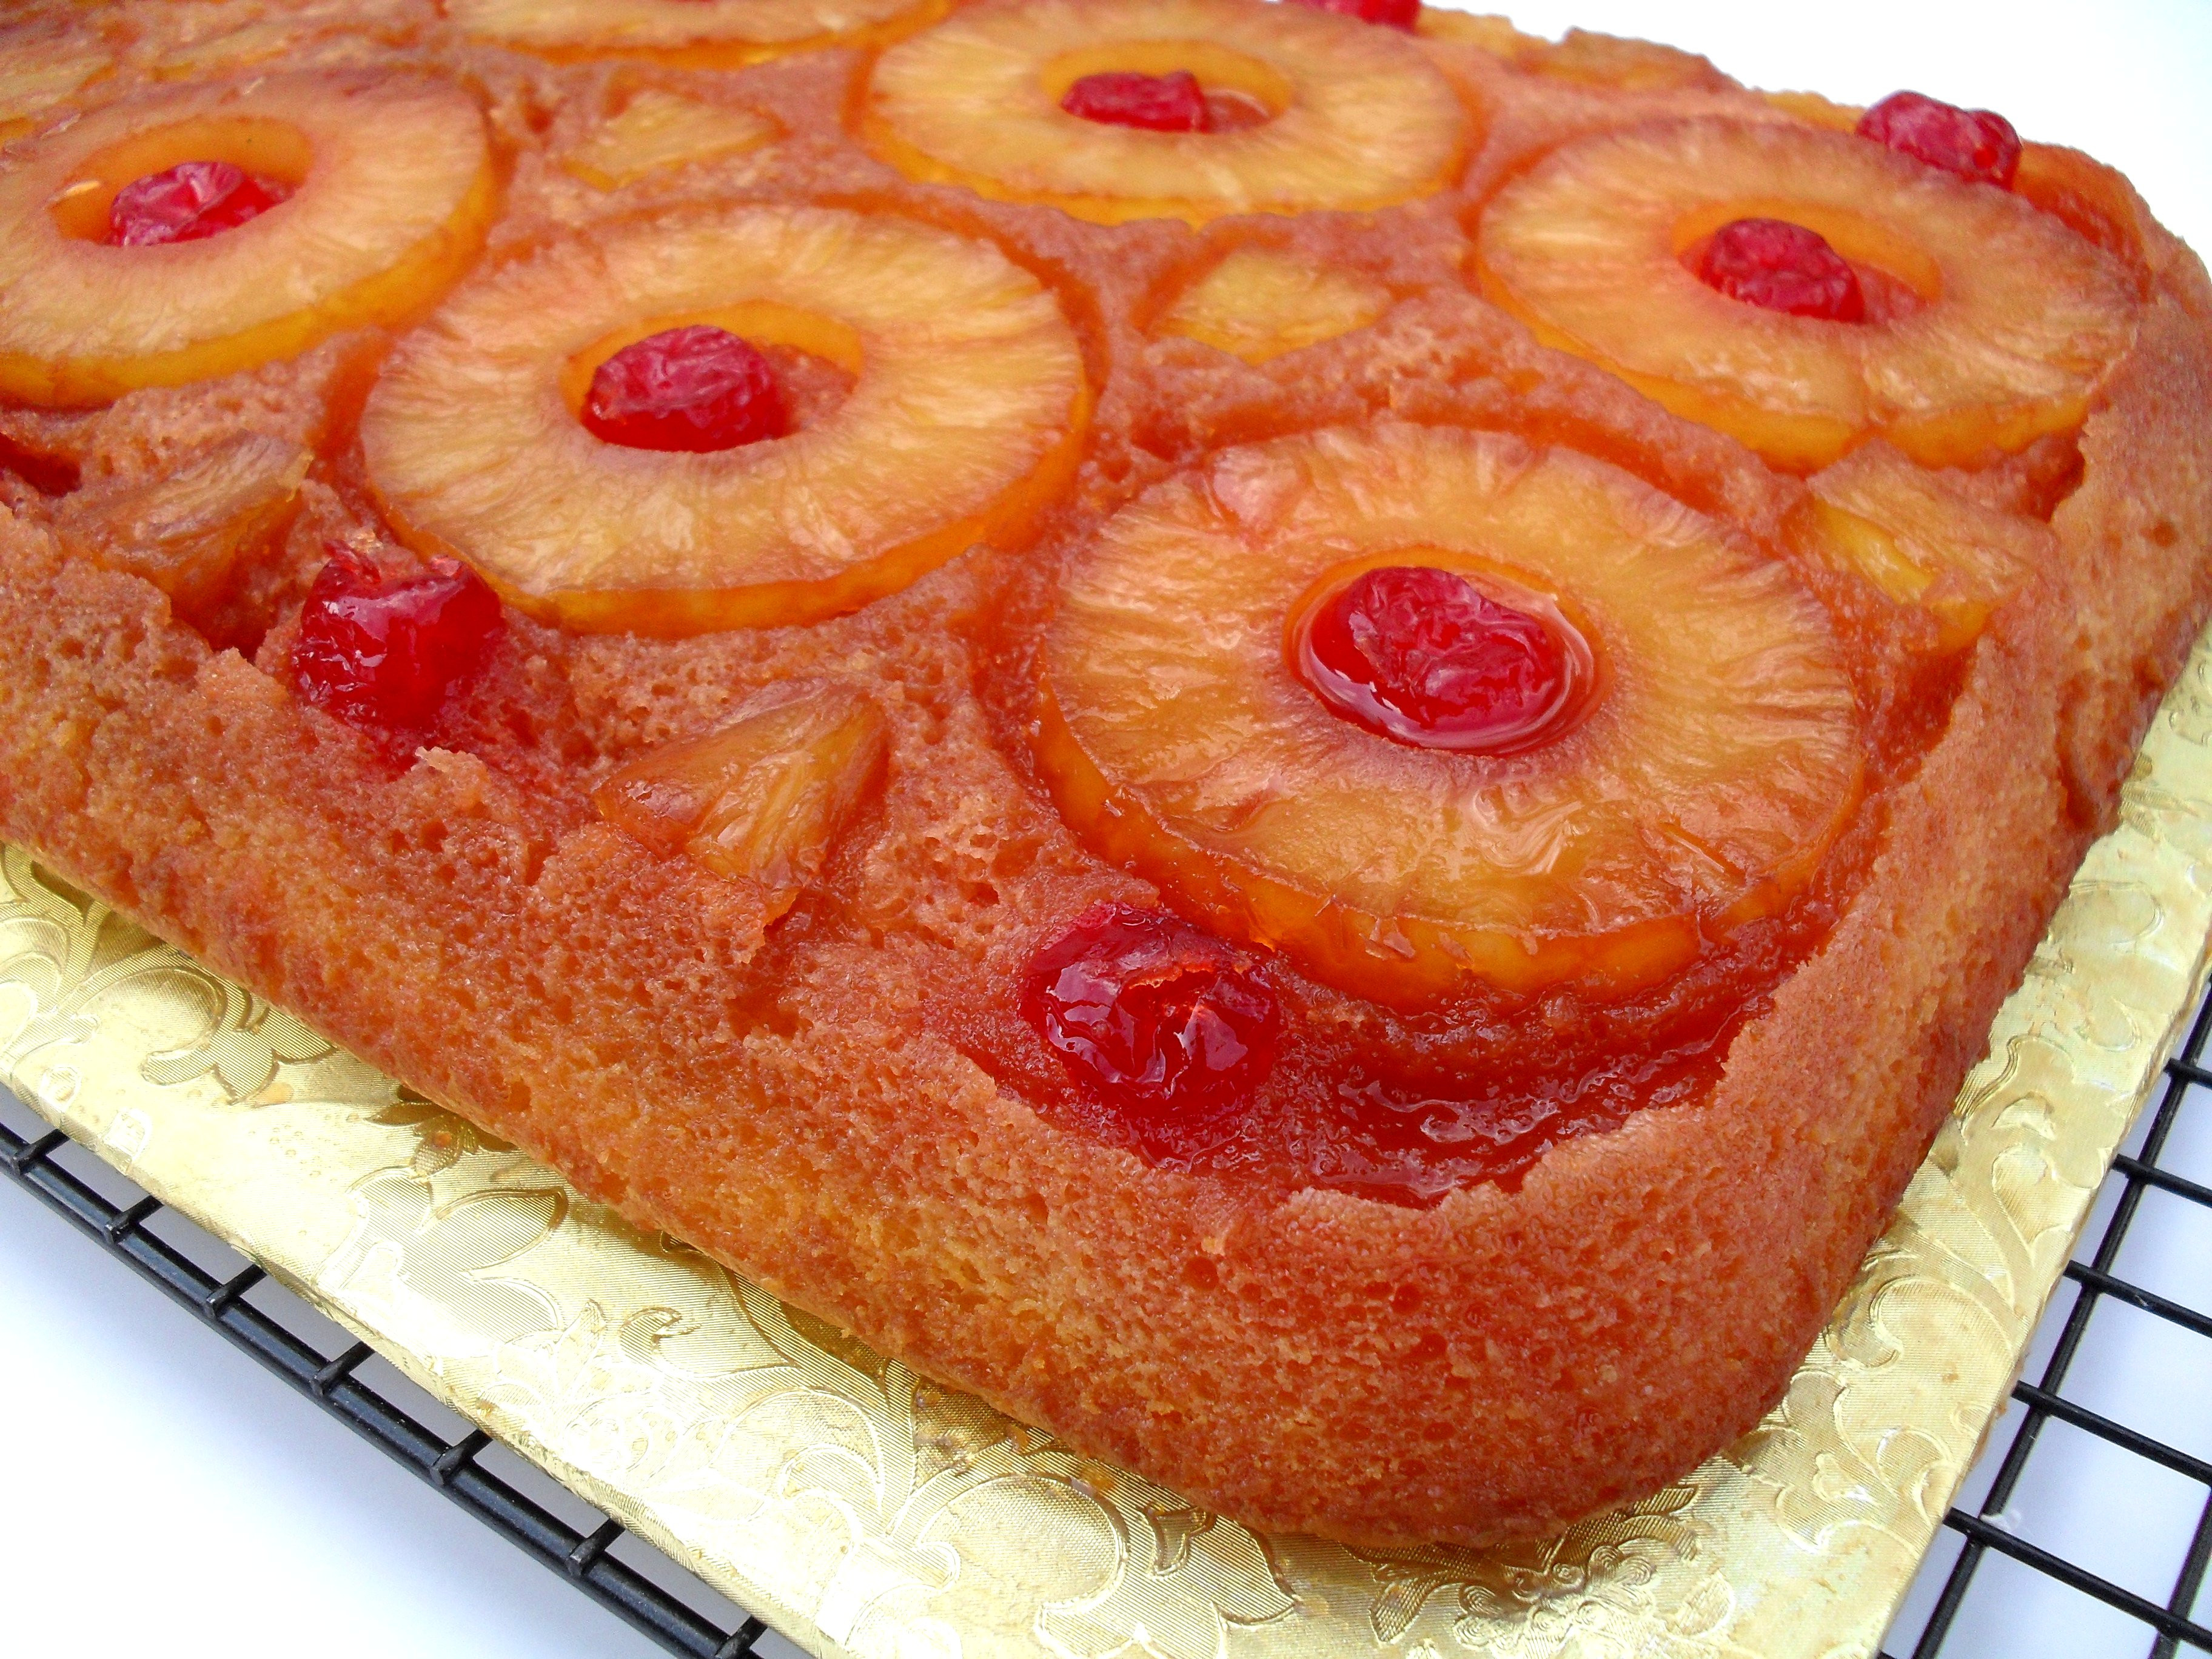 How To Make A Pineapple Upside Down Cake
 easy pineapple upside down cake recipe